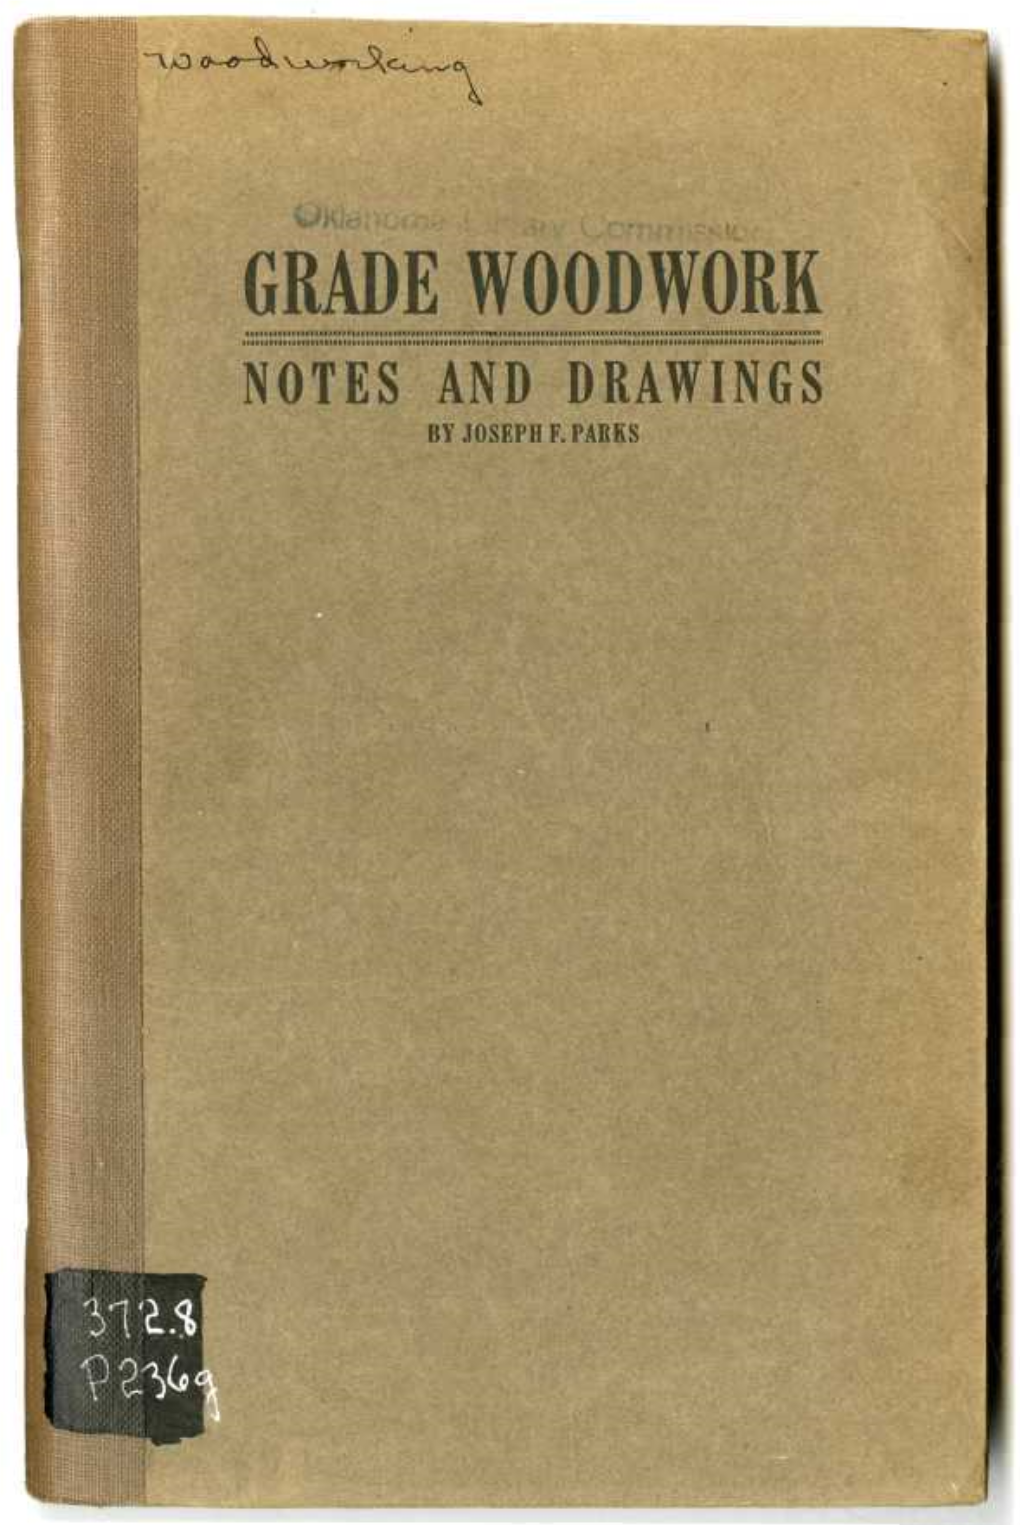 Gradewoodwork Notes and Diaiings by Joseph F